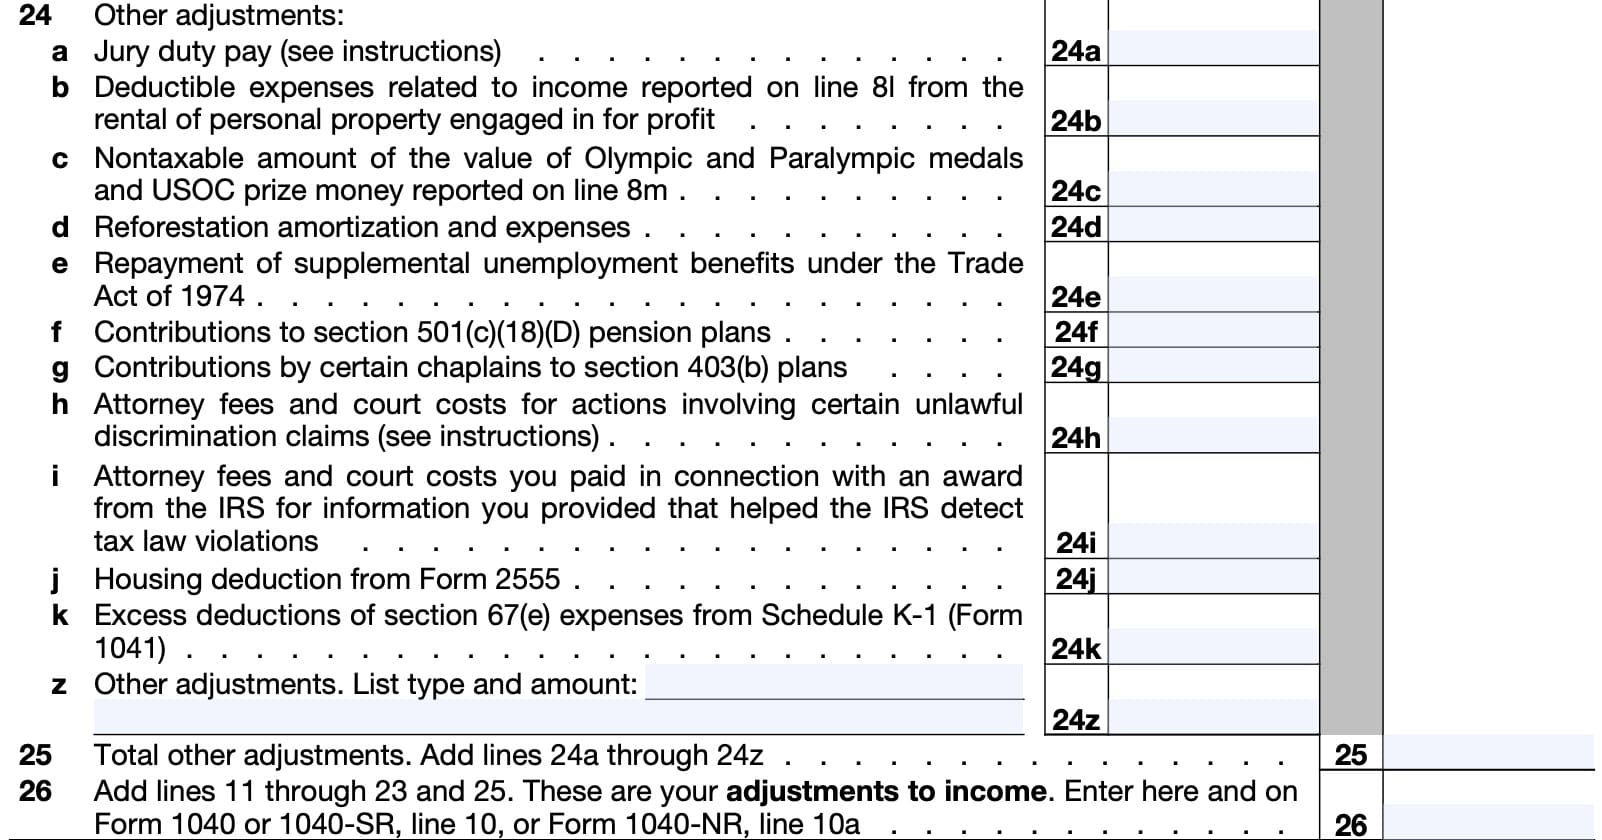 part ii: adjustments to income, lines 24 through 126